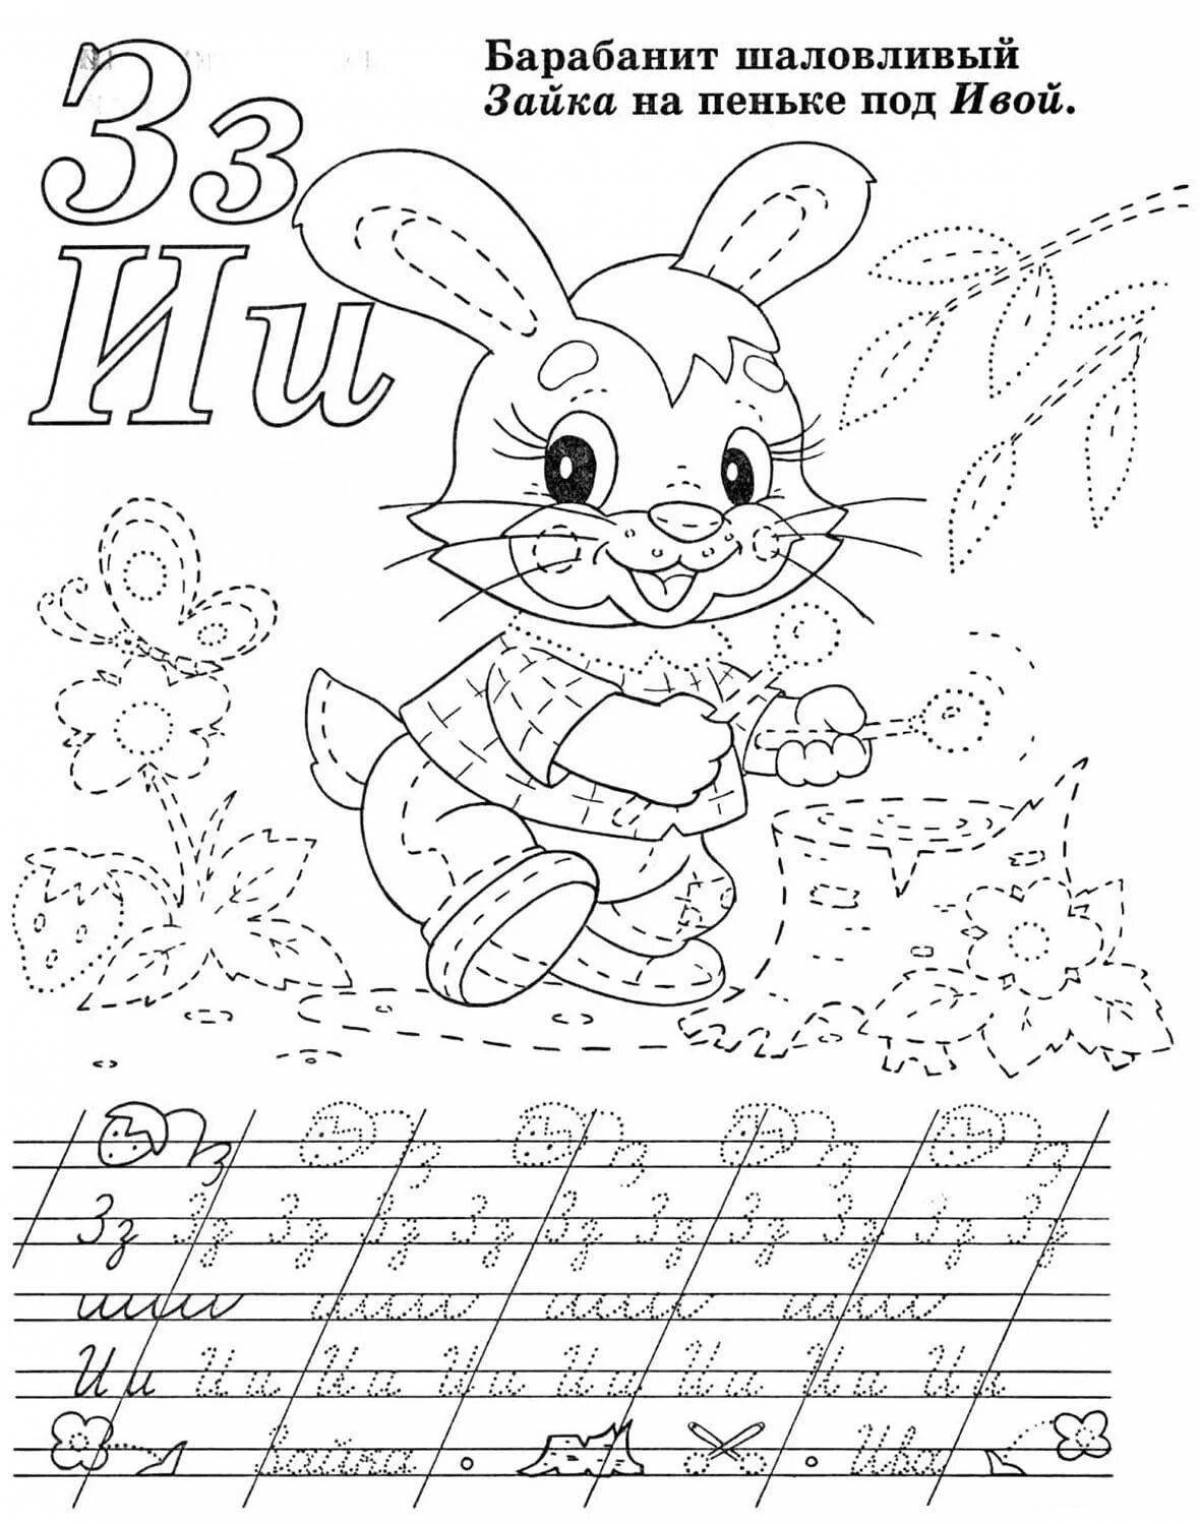 Awesome alphabet spelling coloring book